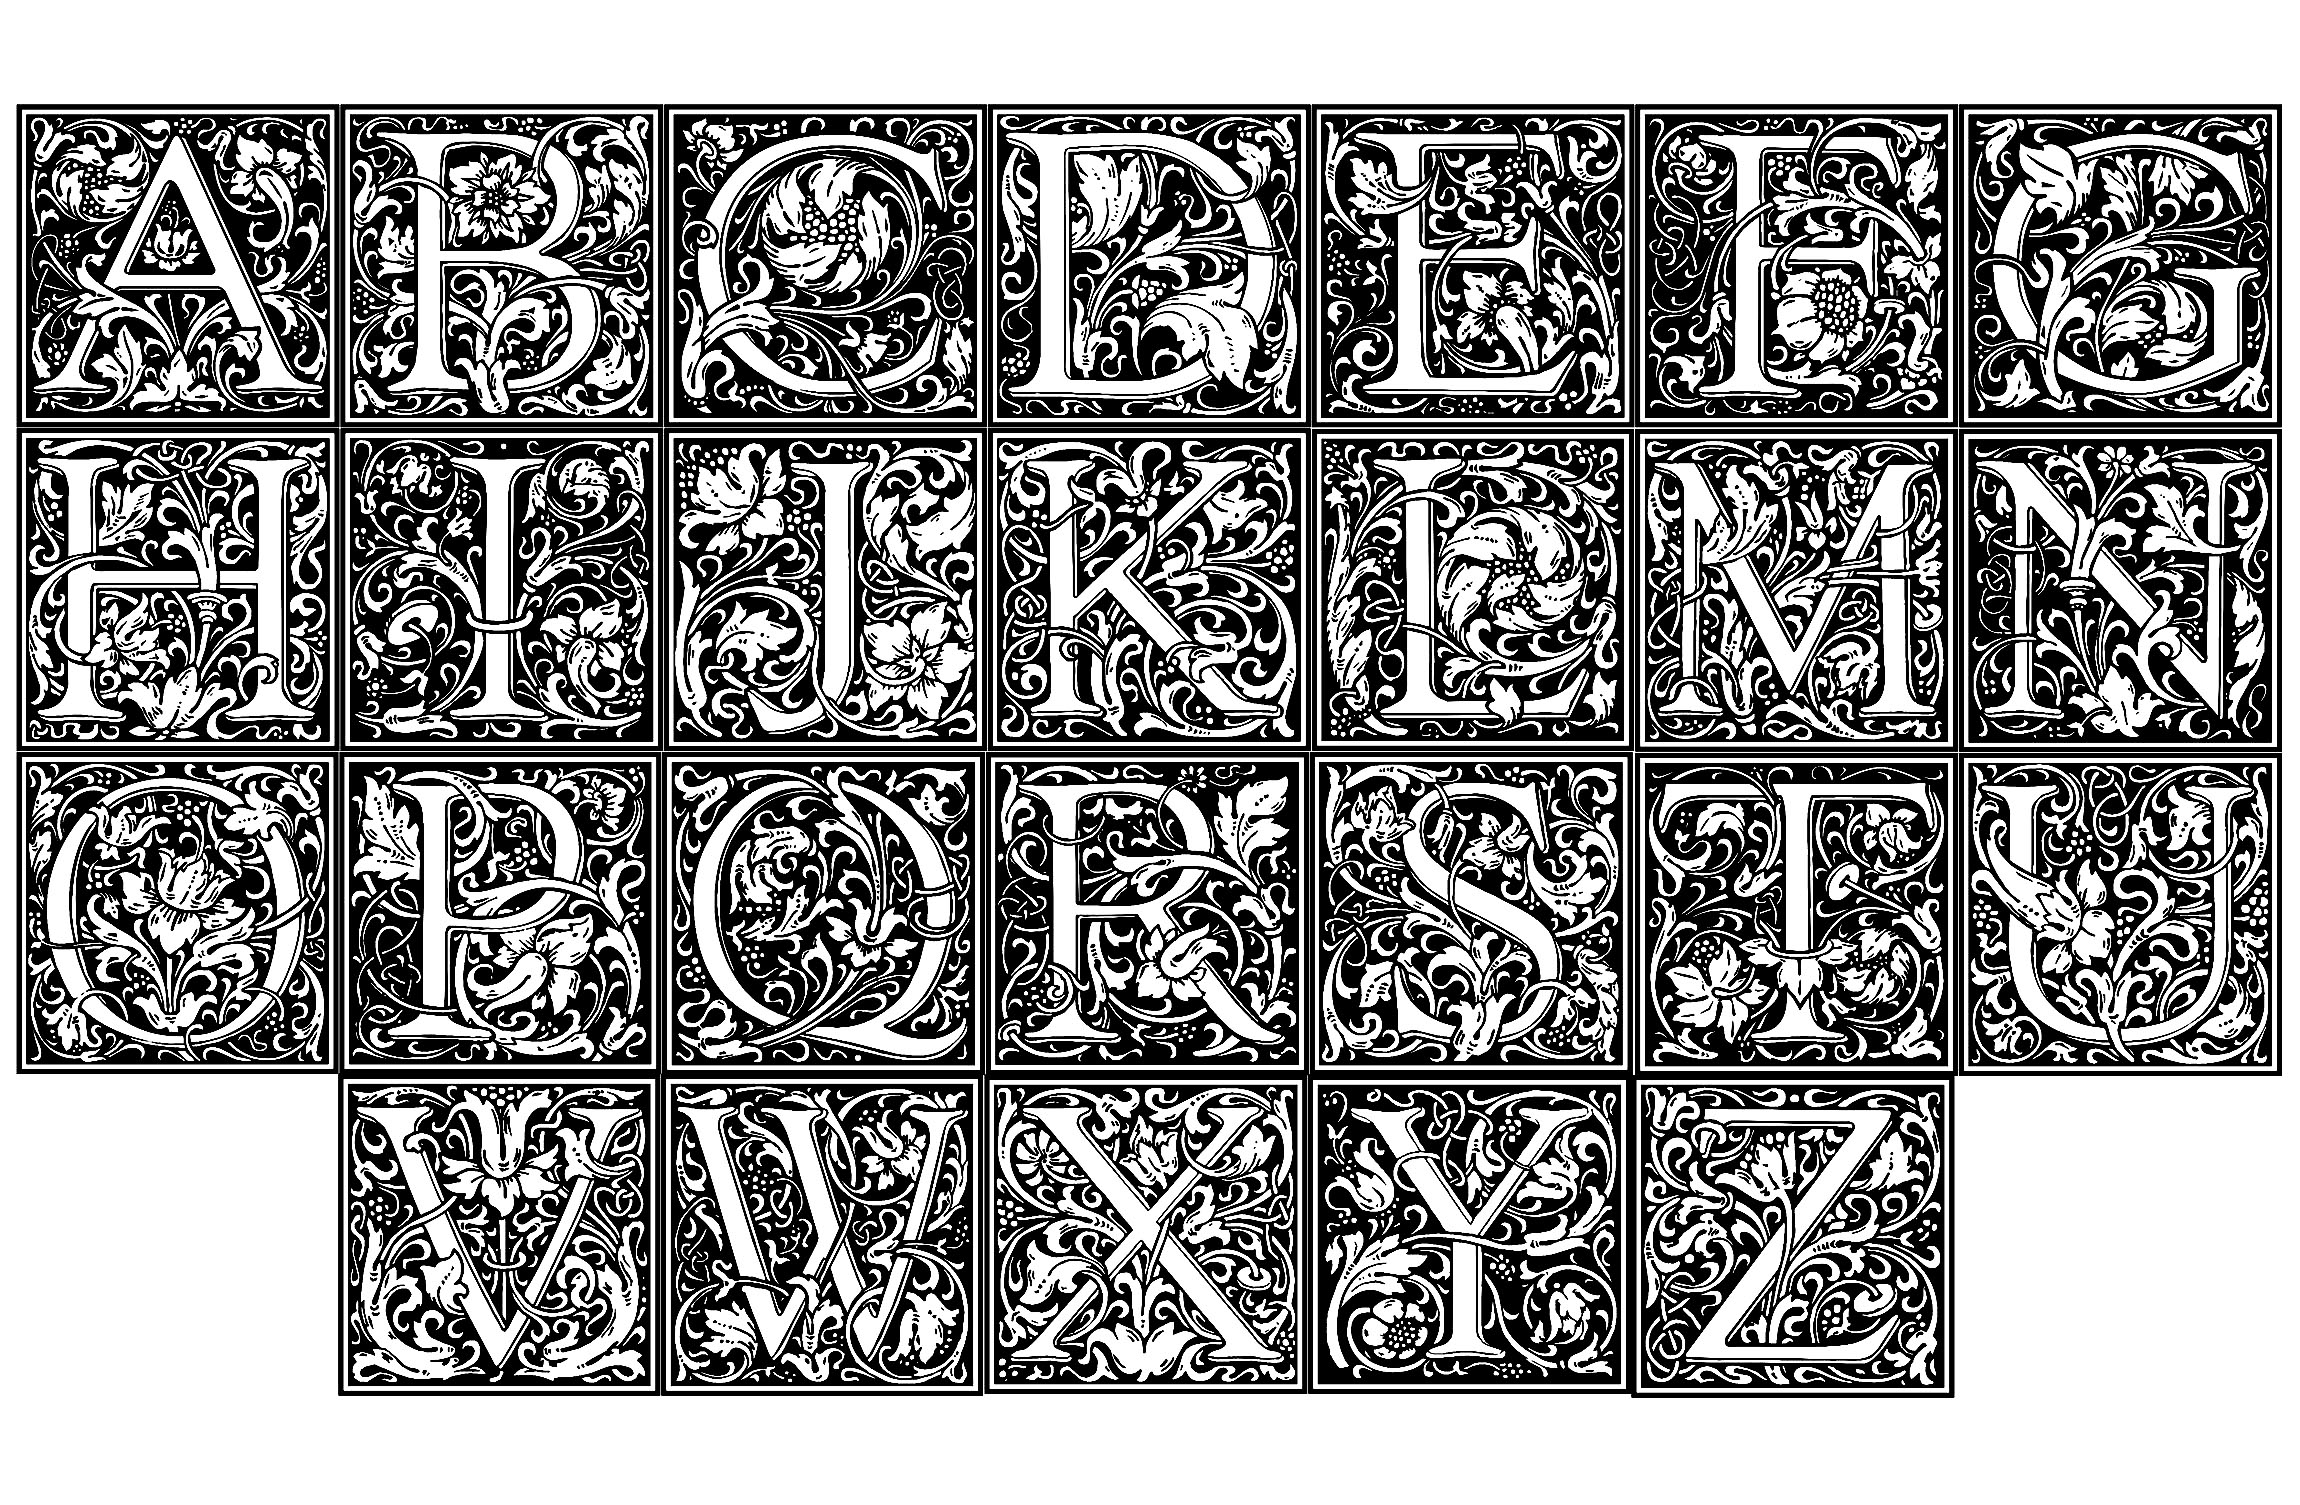 An entire Alphabet to color, created from illustrations by English artist William Morris (1834 - 1896). Each letter of the alphabet is embellished with typical Art